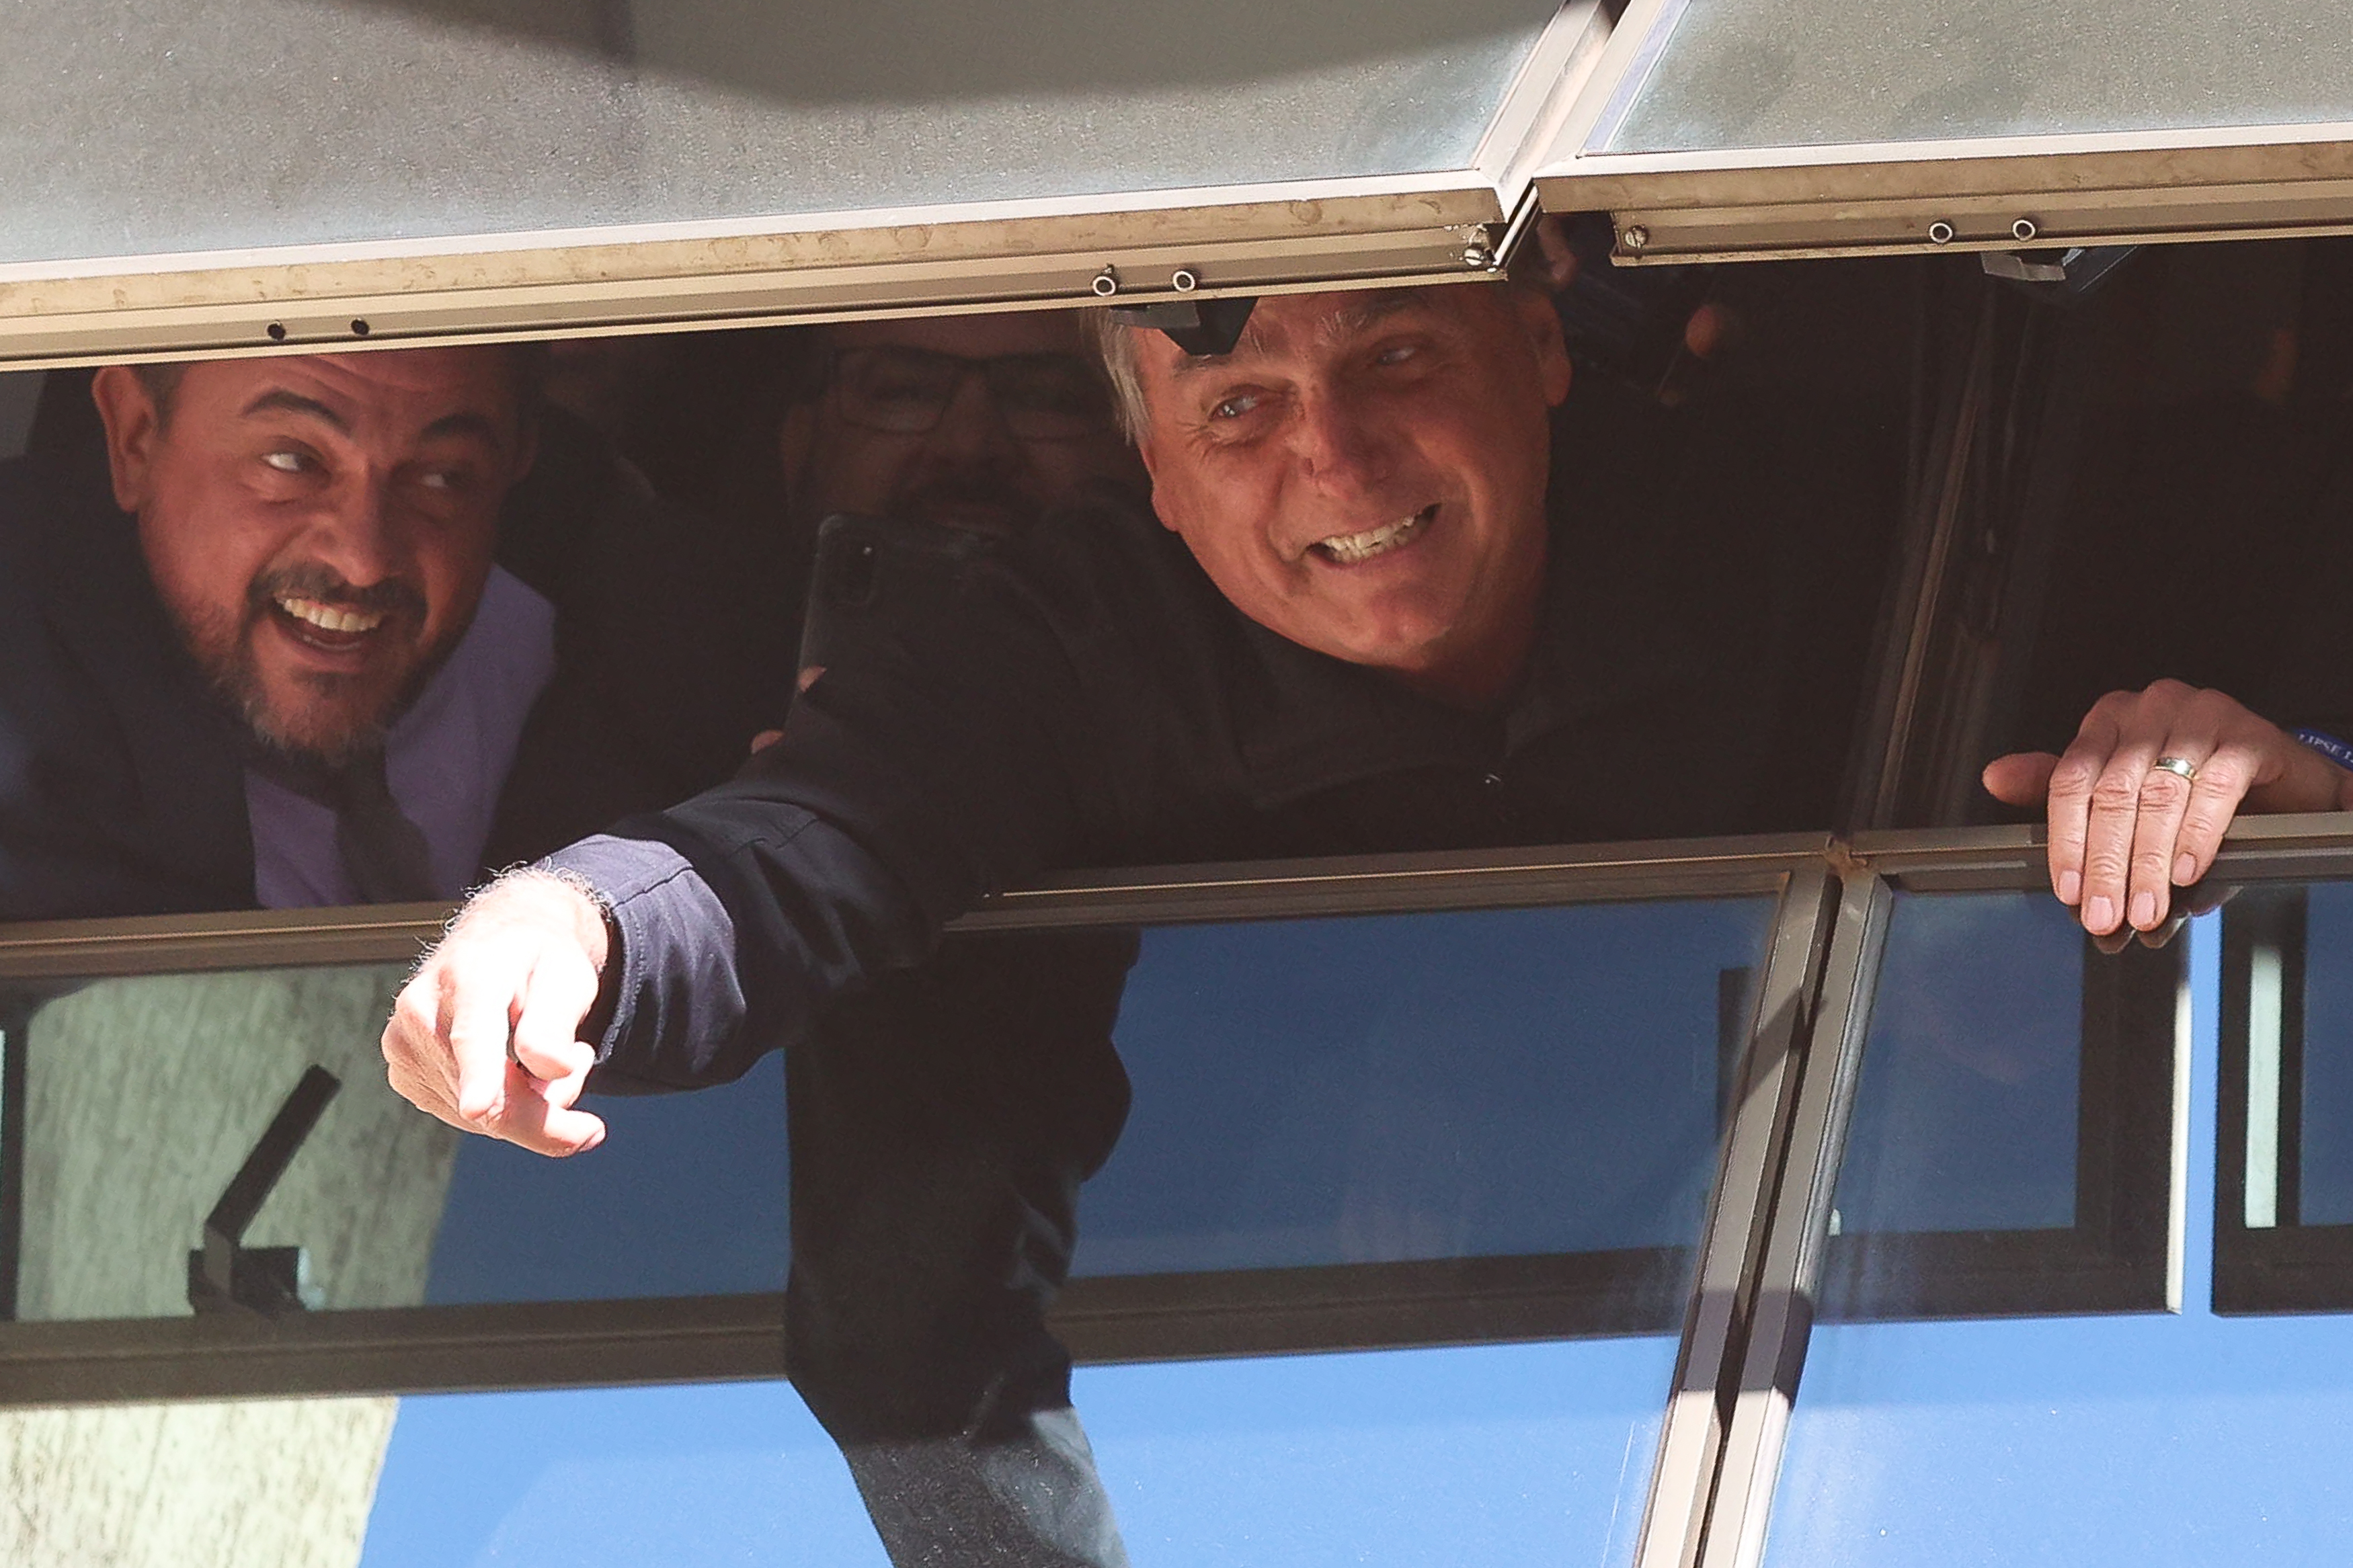 Jair Bolsonaro, smiling broadly, reaches his hand out of an open window.